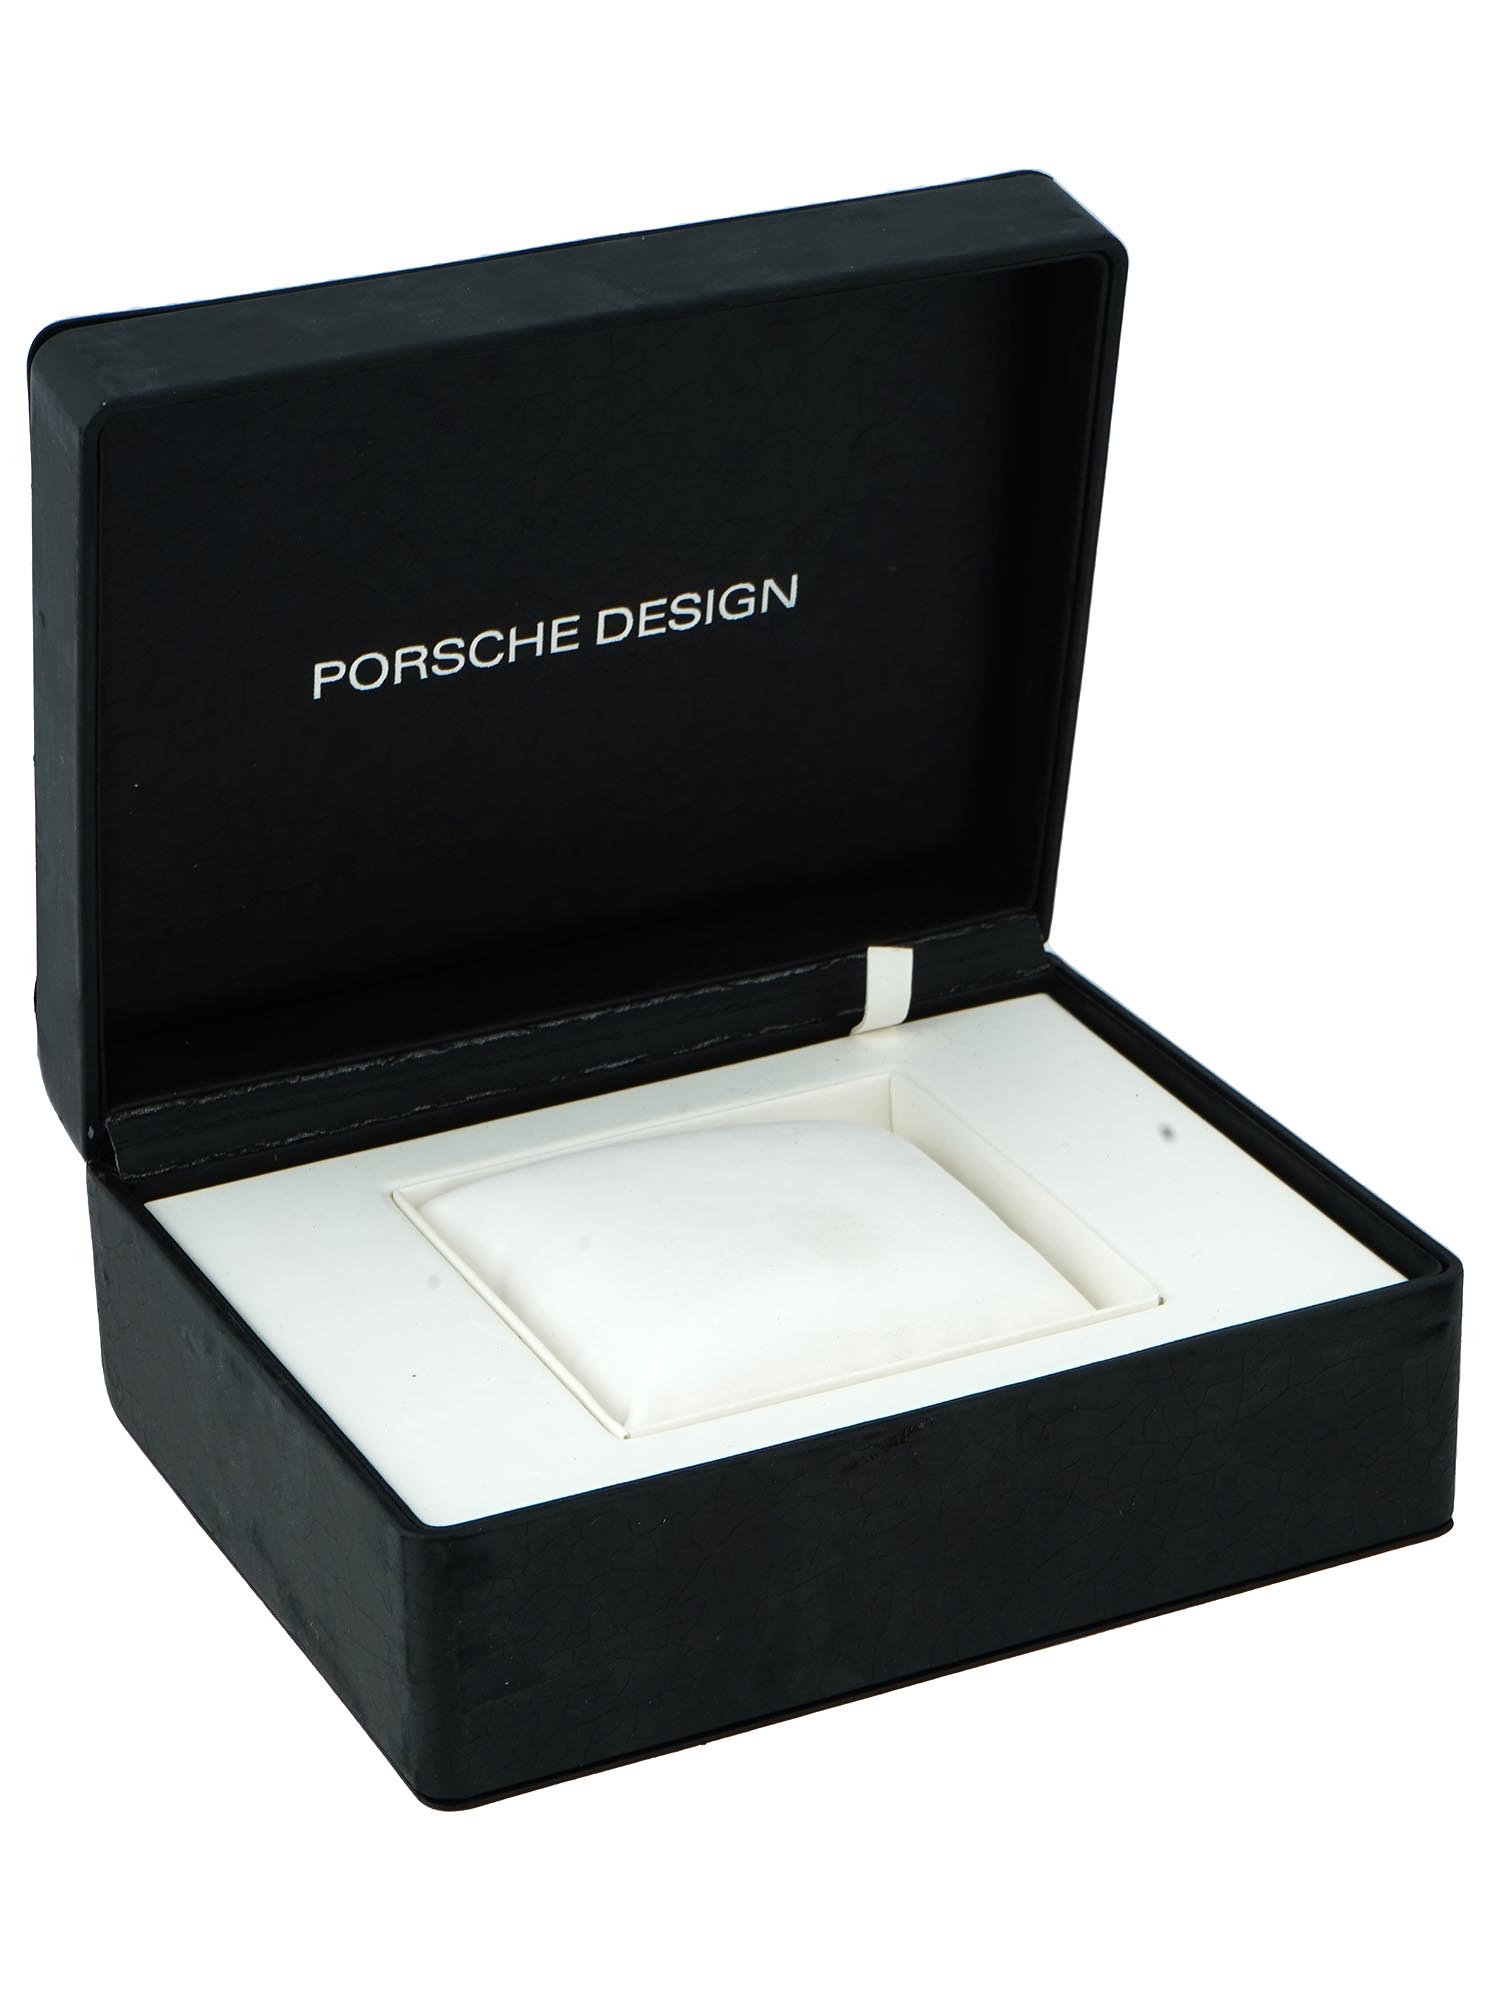 PORSCHE DESIGN WATCH BOXES AND FORTIS COSMONAUTS CASE PIC-7